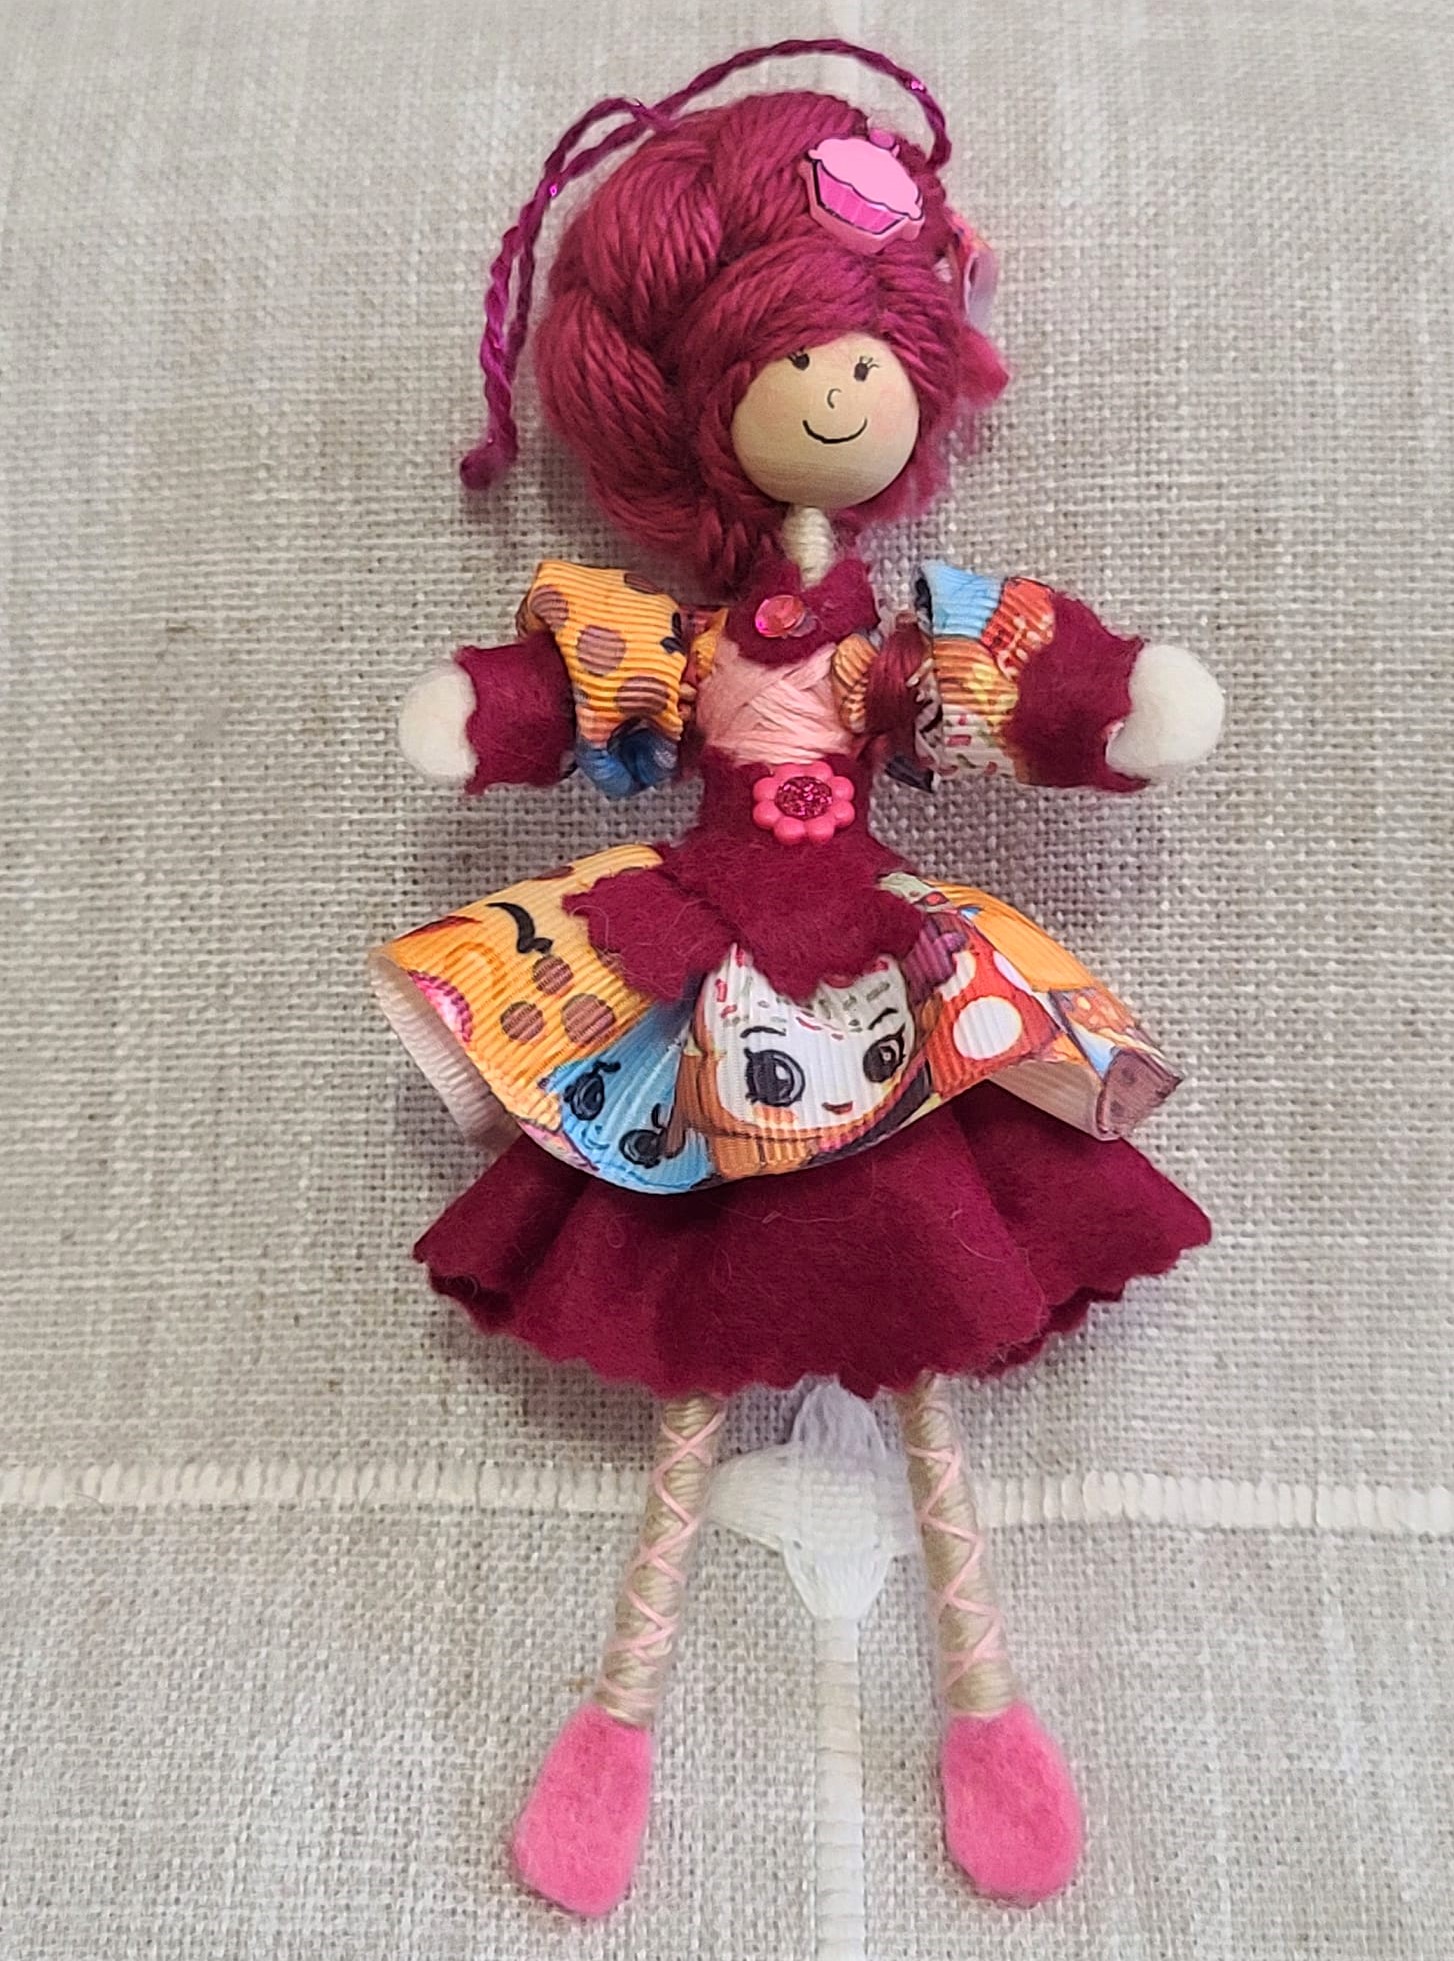 Fushia pink doll with licensed Shopkins fabric as dress